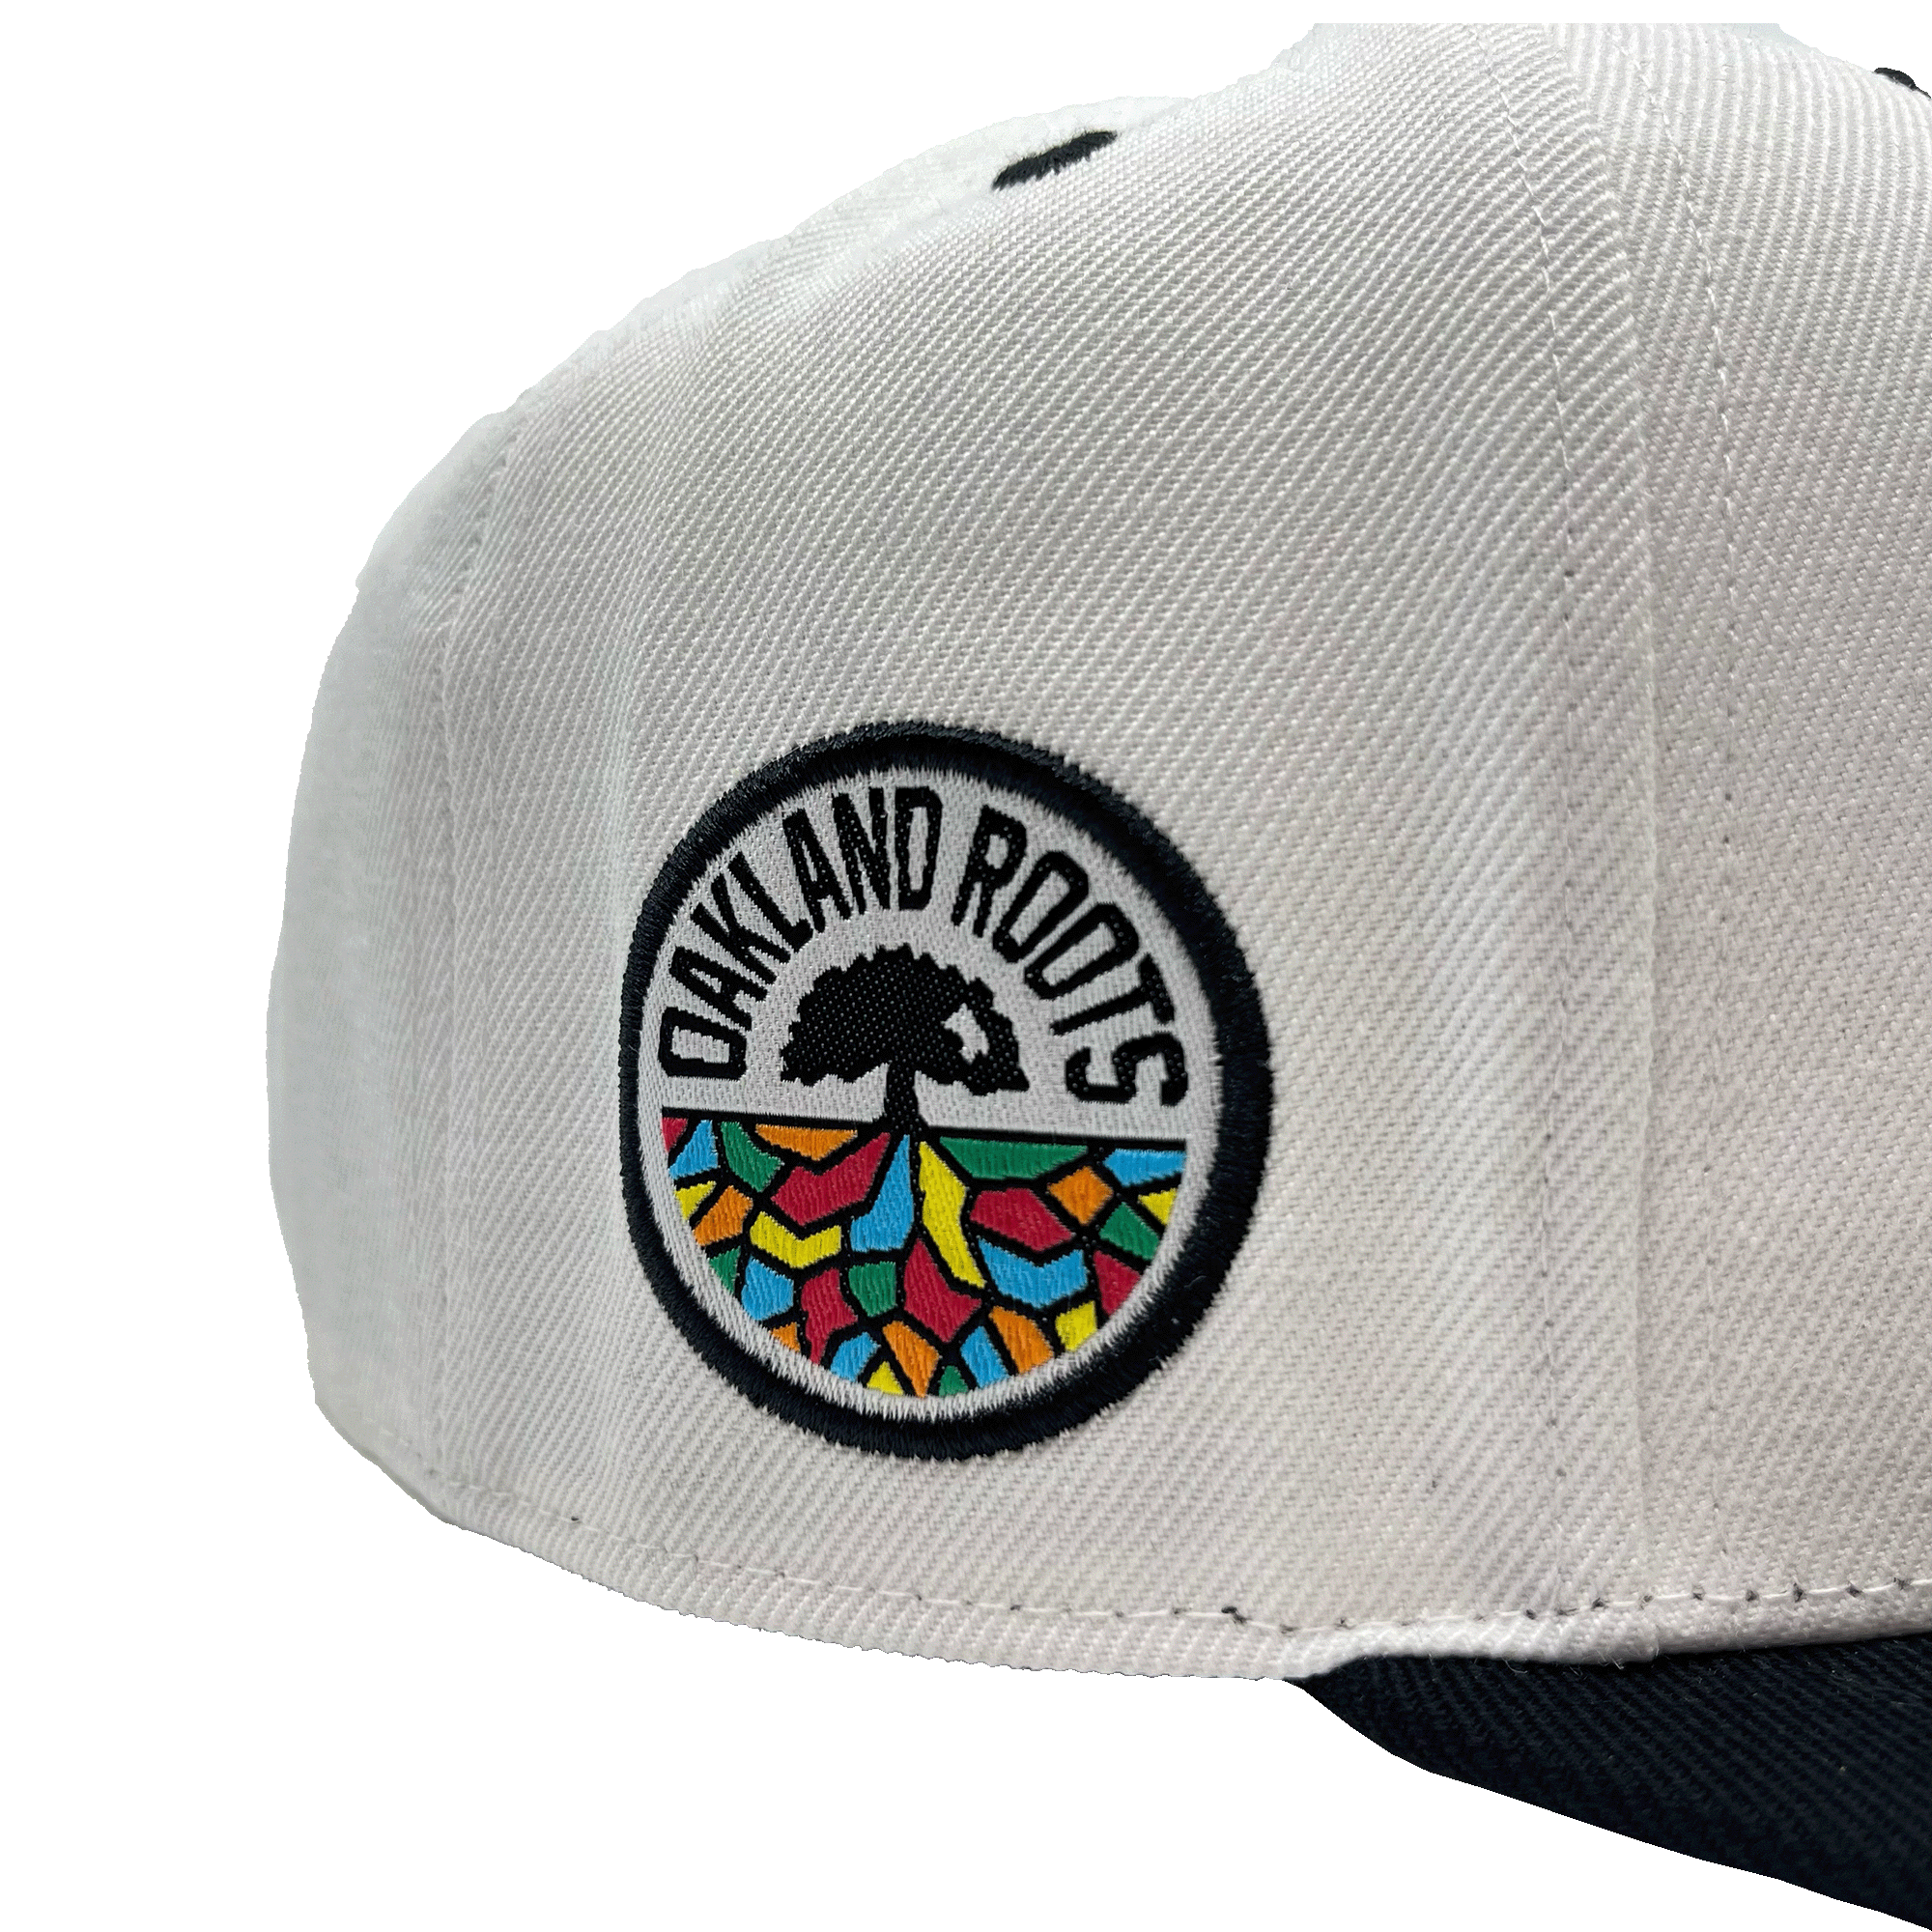 Close-up of full color circle Oakland Roots circle logo patch on the side of white snapback hat.